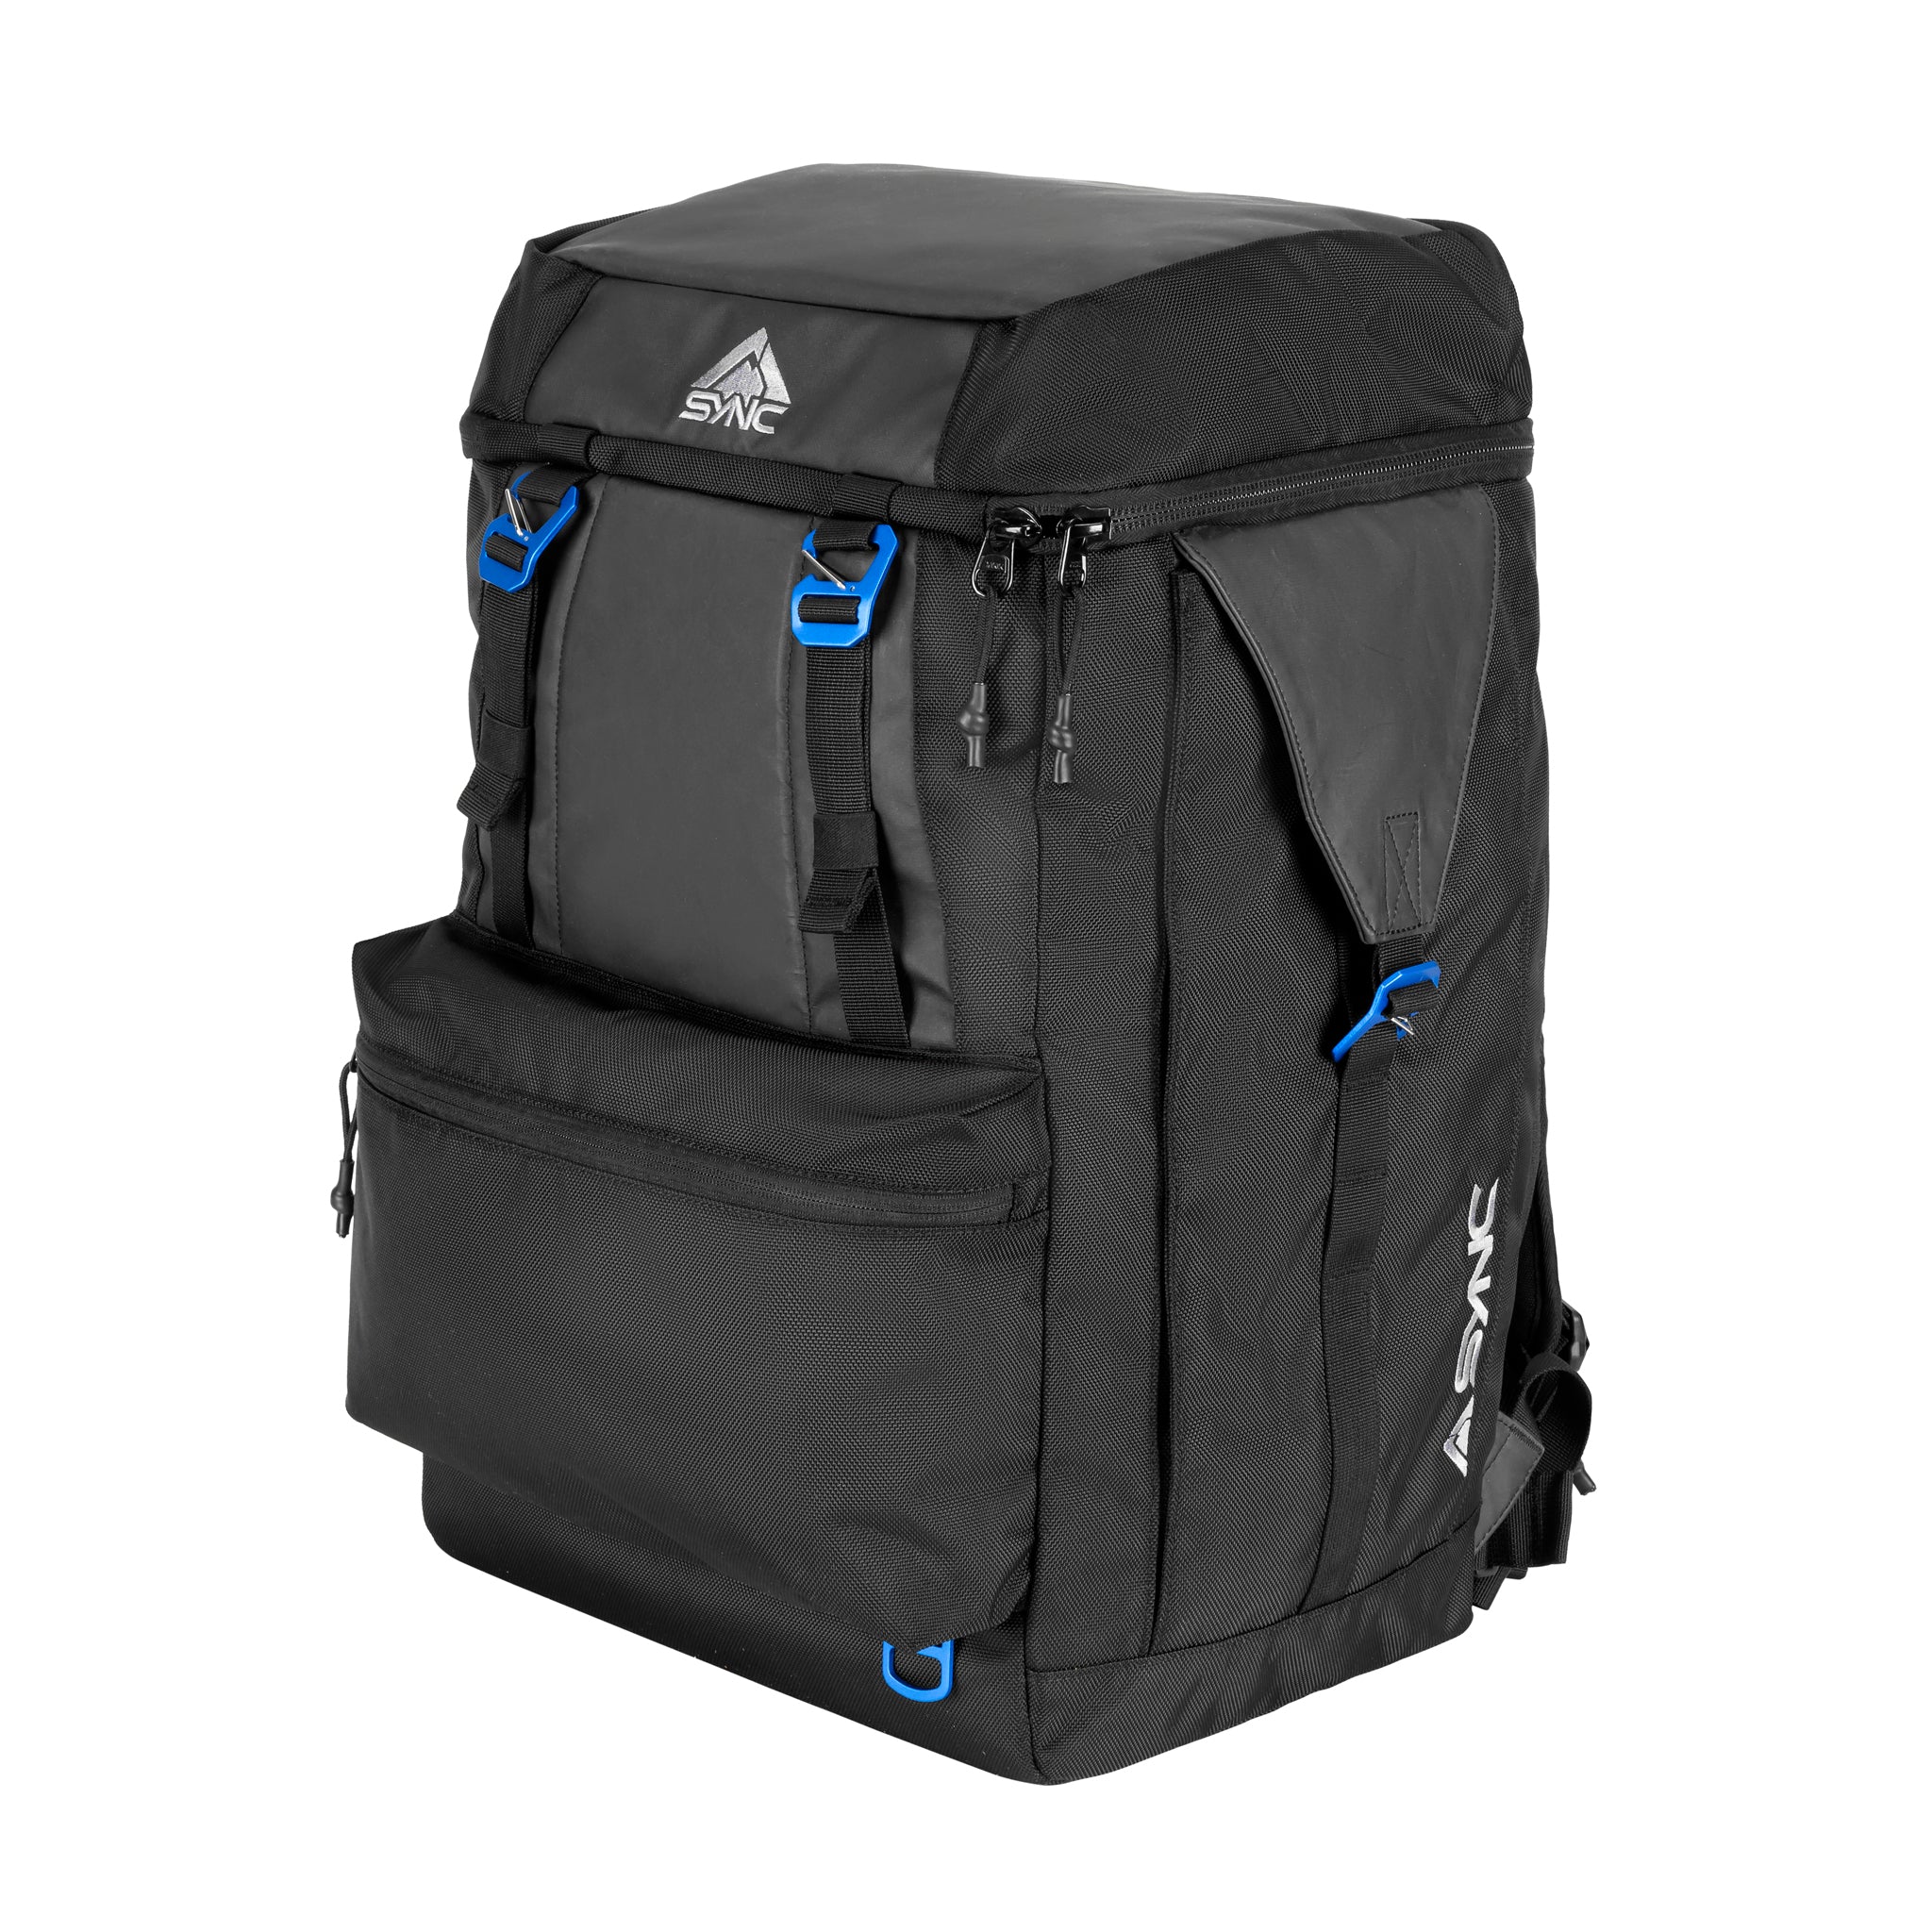 Kingston Competitor Backpack - A3 Performance